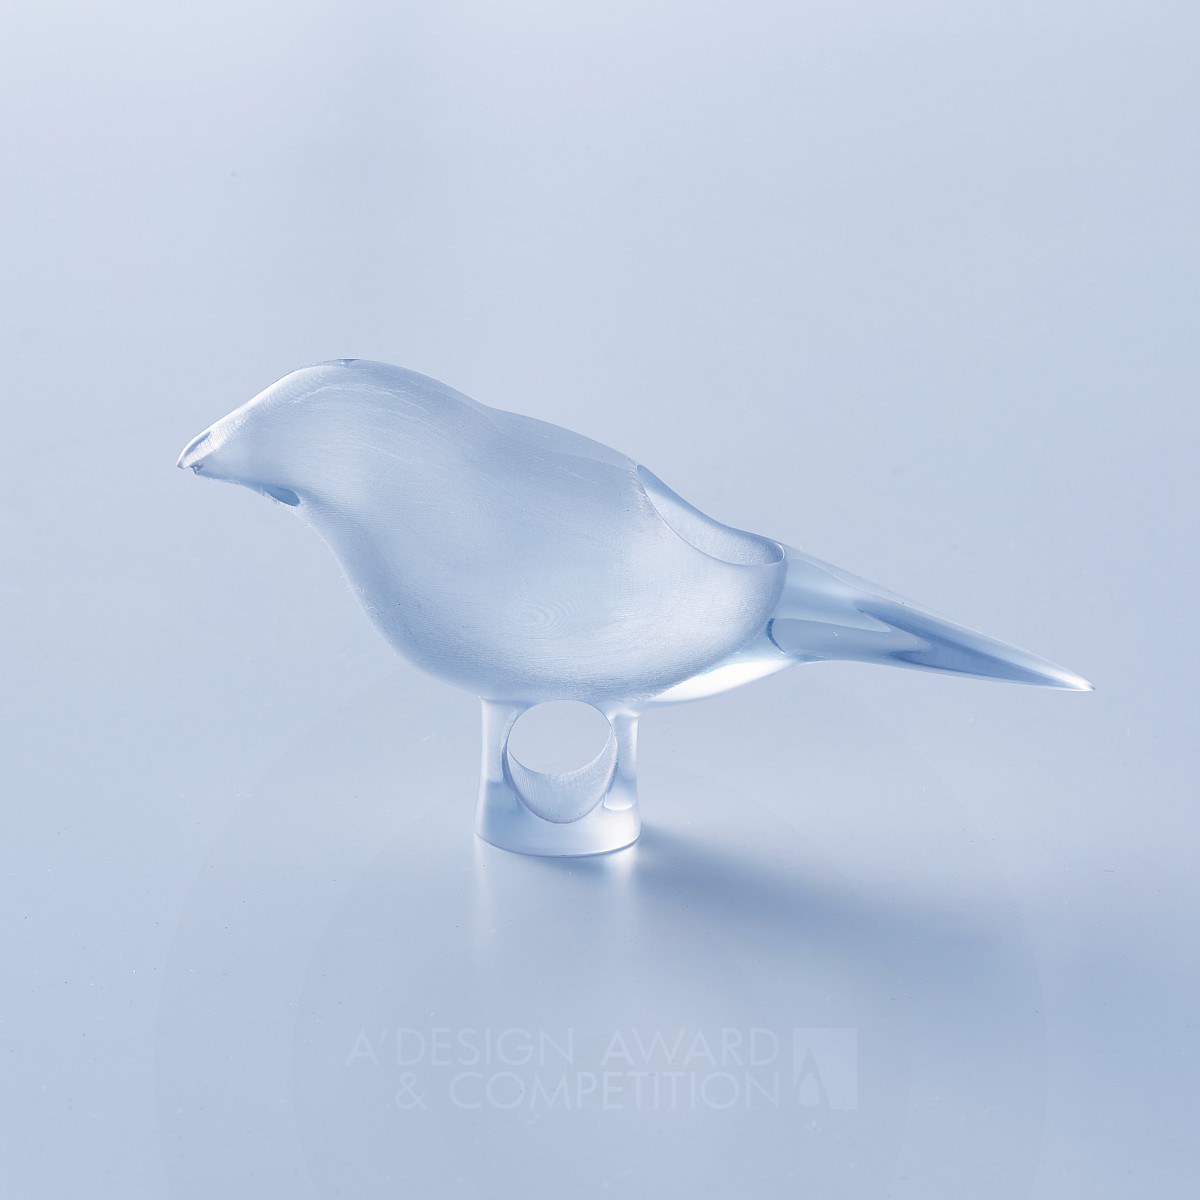 Bird  039 s Sake Cup Cup to Refrain from Drinking by kenji fujii